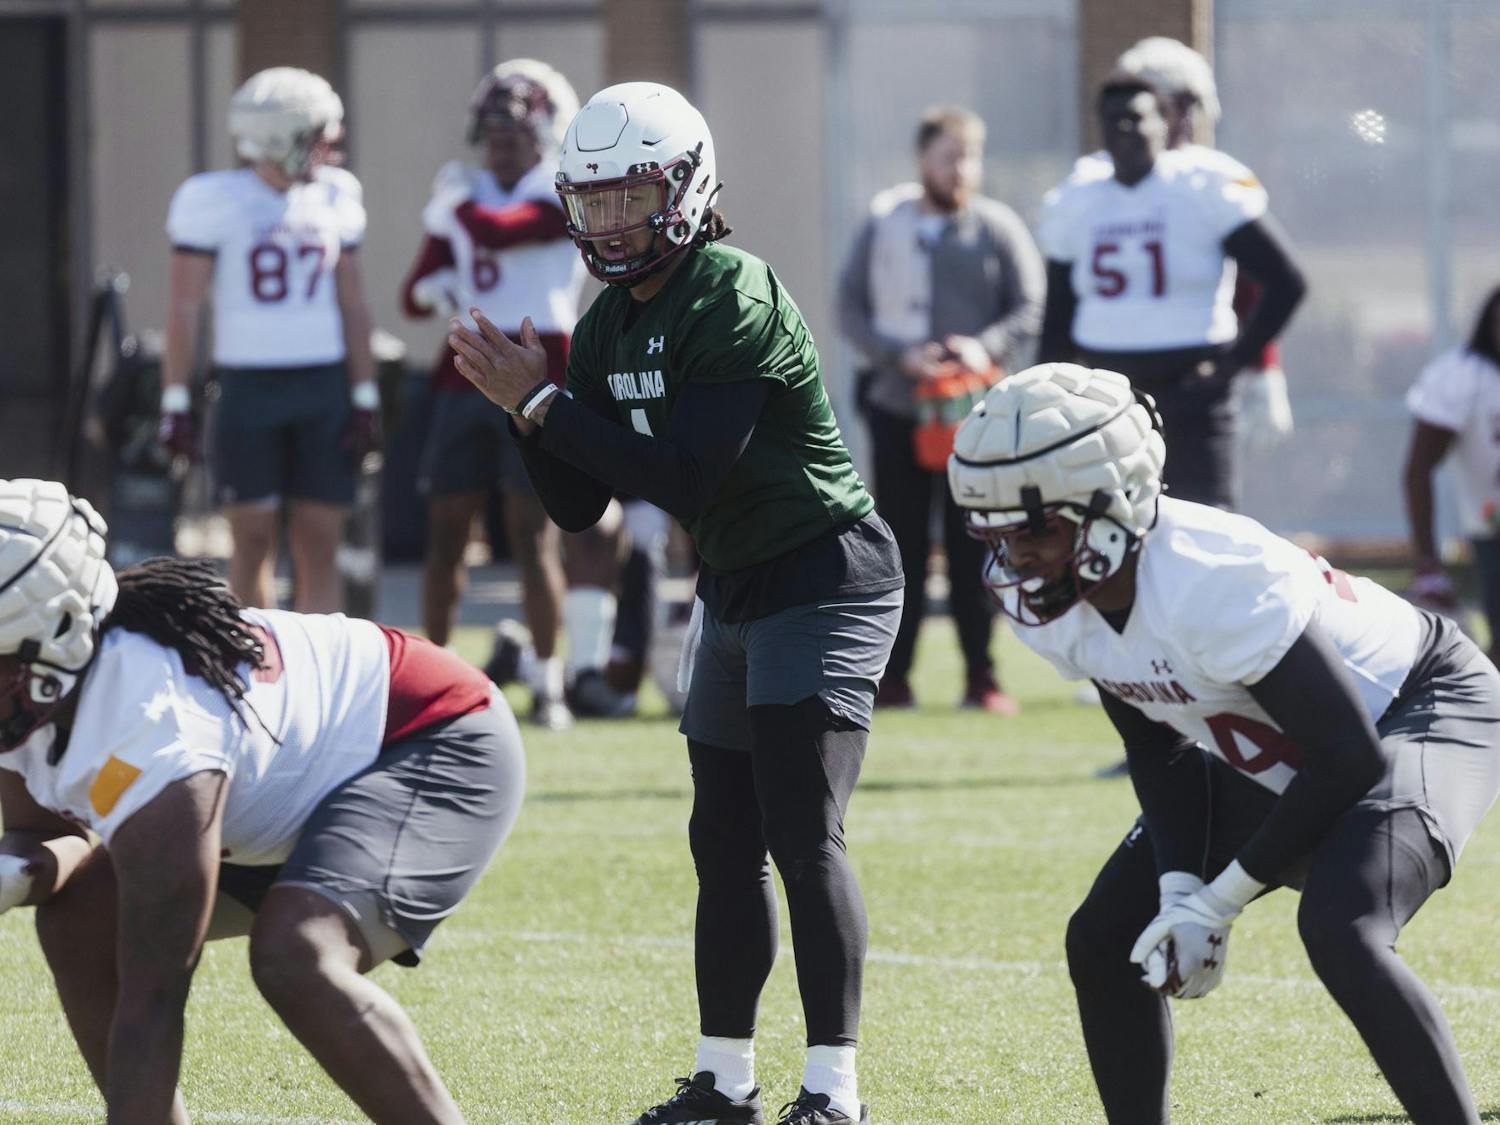 Redshirt senior quarterback Robby Ashford calls for the snap during one of the South Carolina football teams' spring practice sessions. Ashford, a recent transfer to South Carolina, has two years of eligibility remaining after completing stints with Oregon and Auburn.